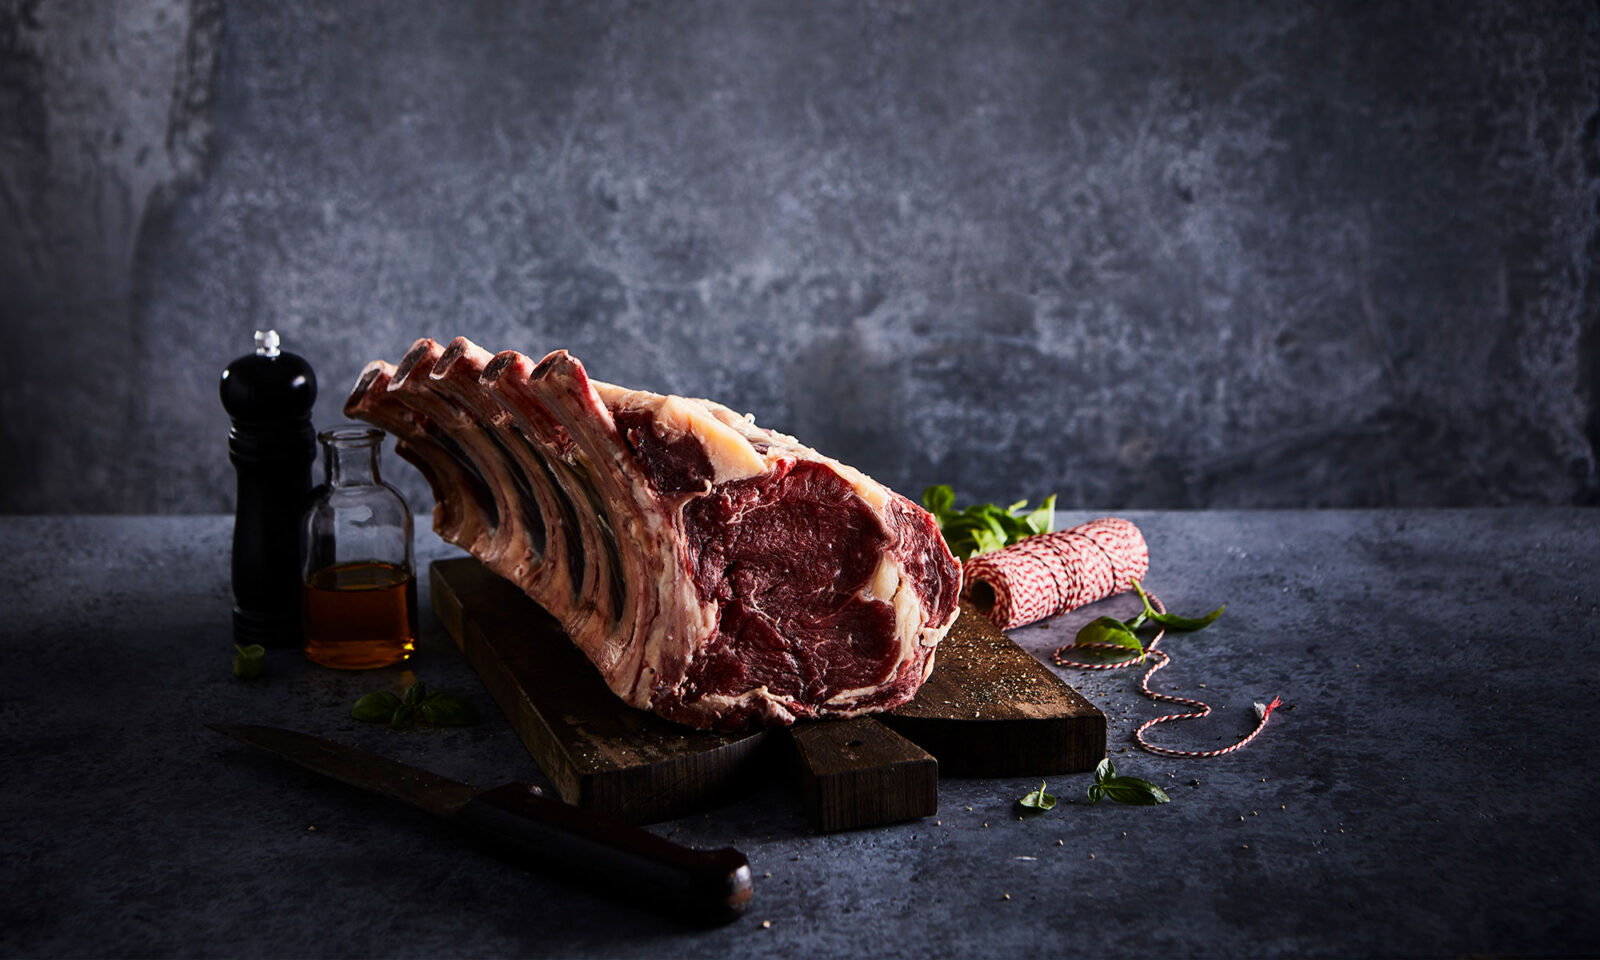 Tipperary Dry Aged Beef, Neworld for brand strategy, design, packaging, and digital needs